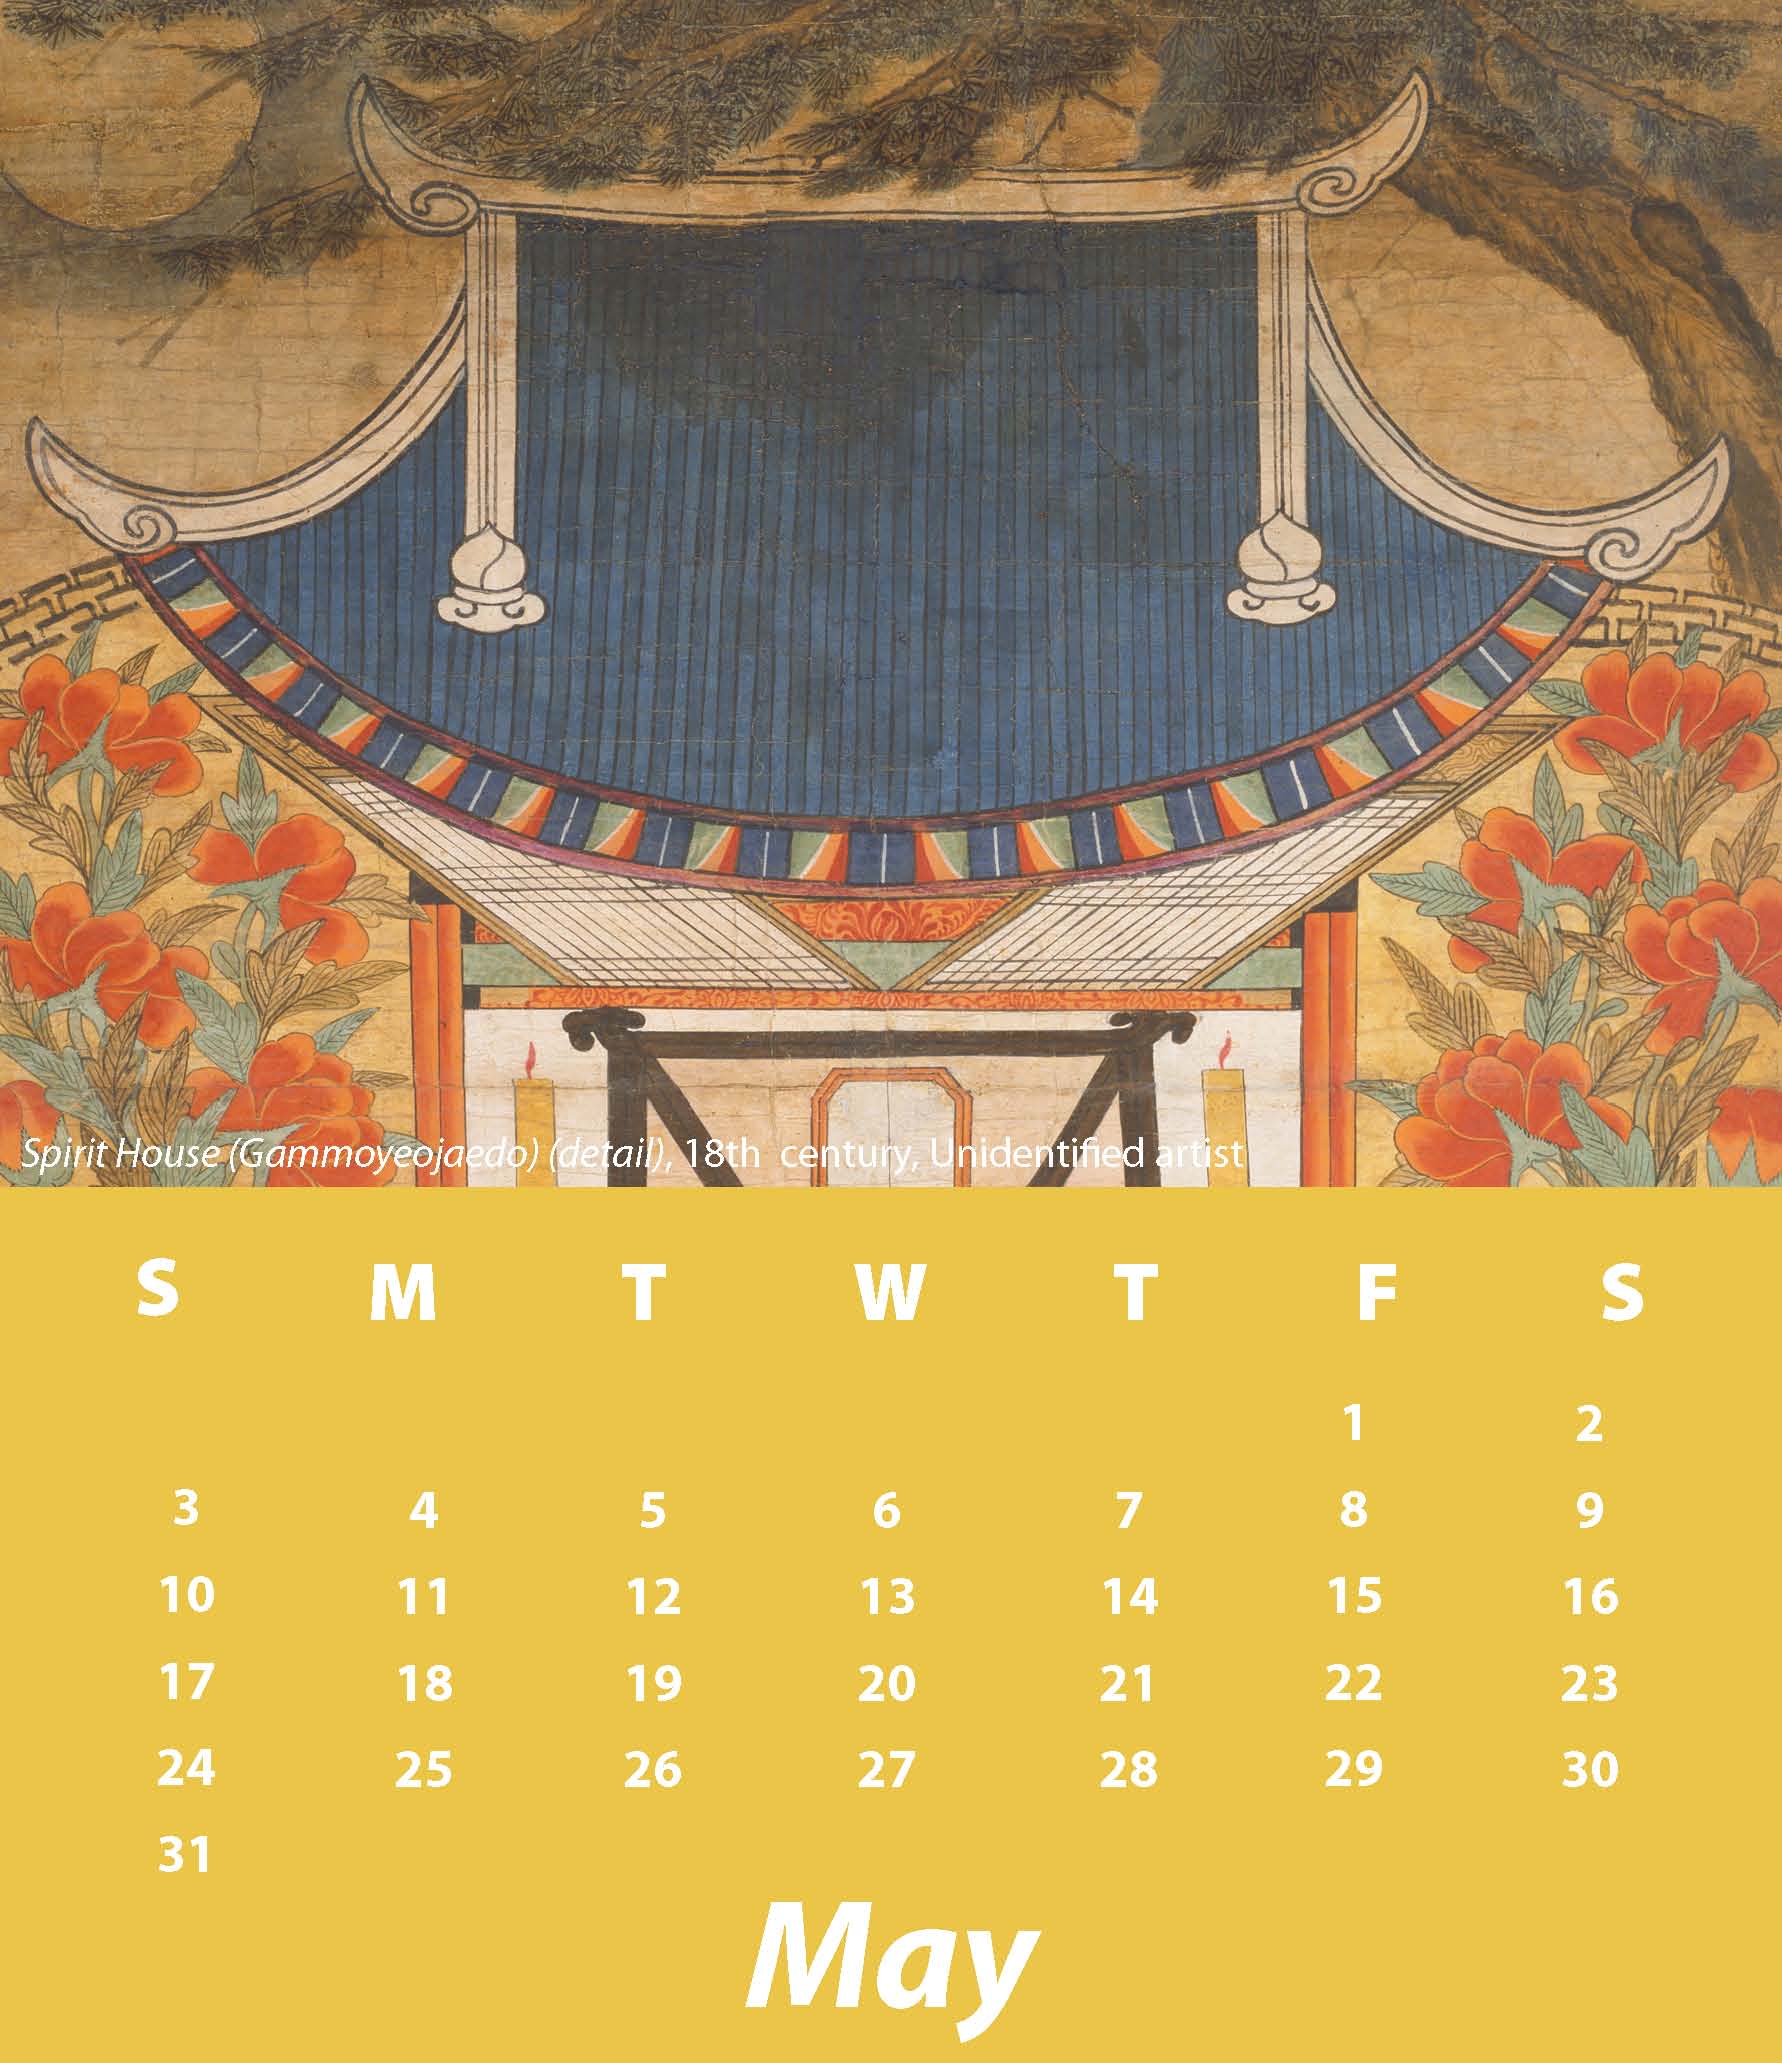 a May calendar with the image Spirit House